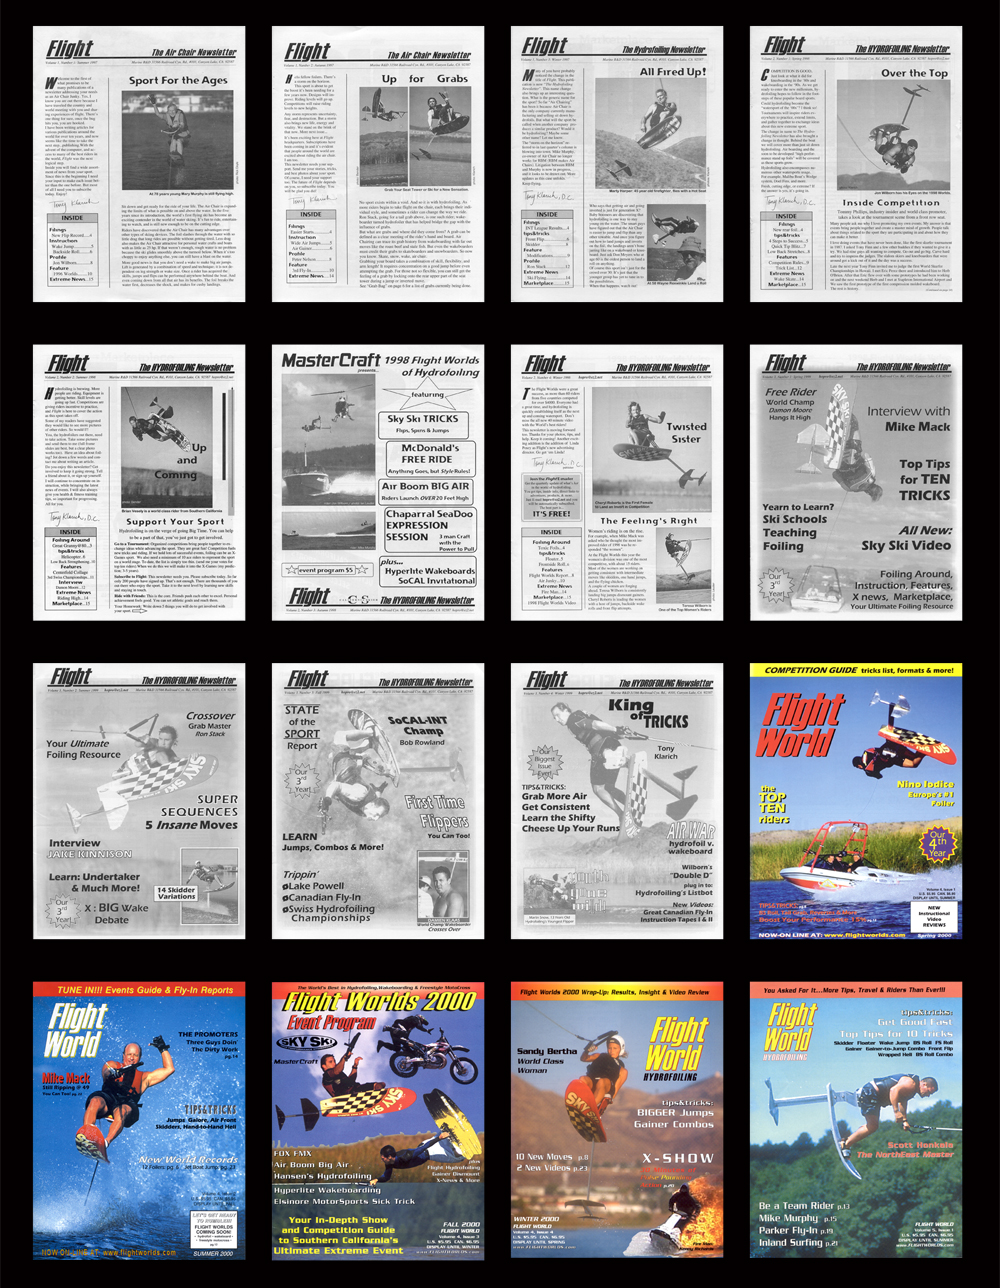 adventures-water-skiing-hydrofoiling-1997-01-flight-world-newsletter-covers